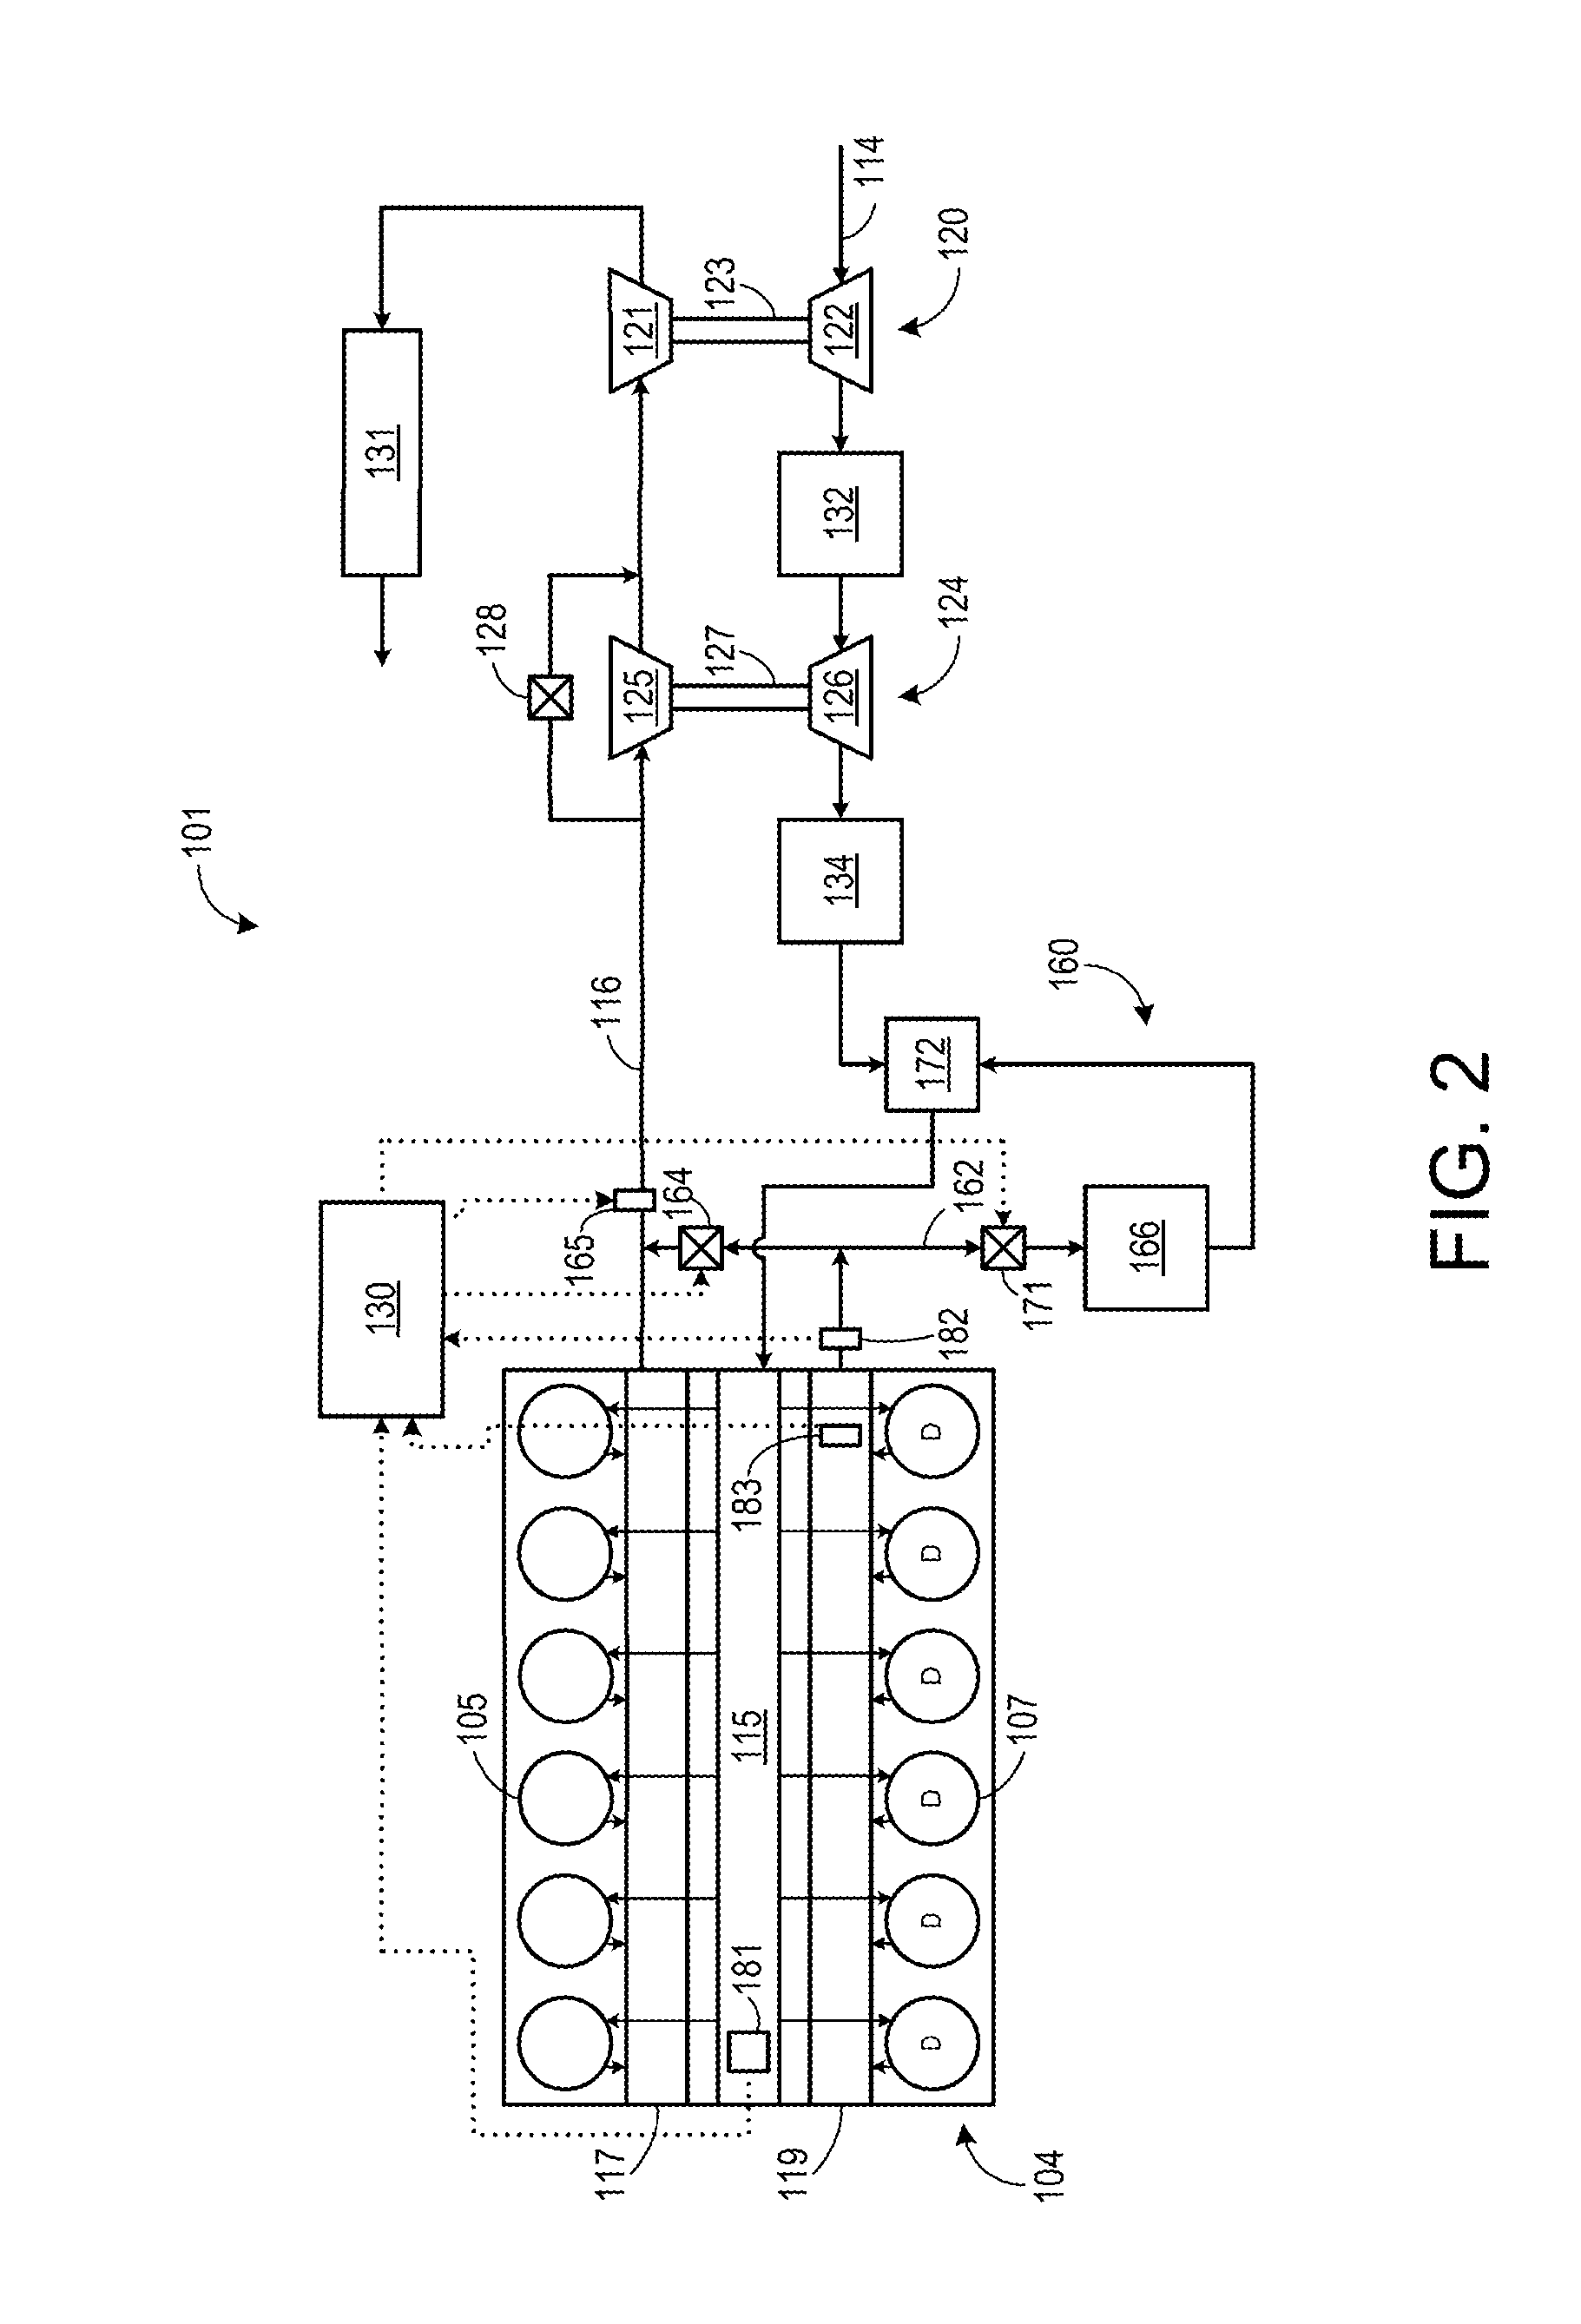 Method and systems for exhaust gas recirculation valve diagnosis based on crankcase pressure